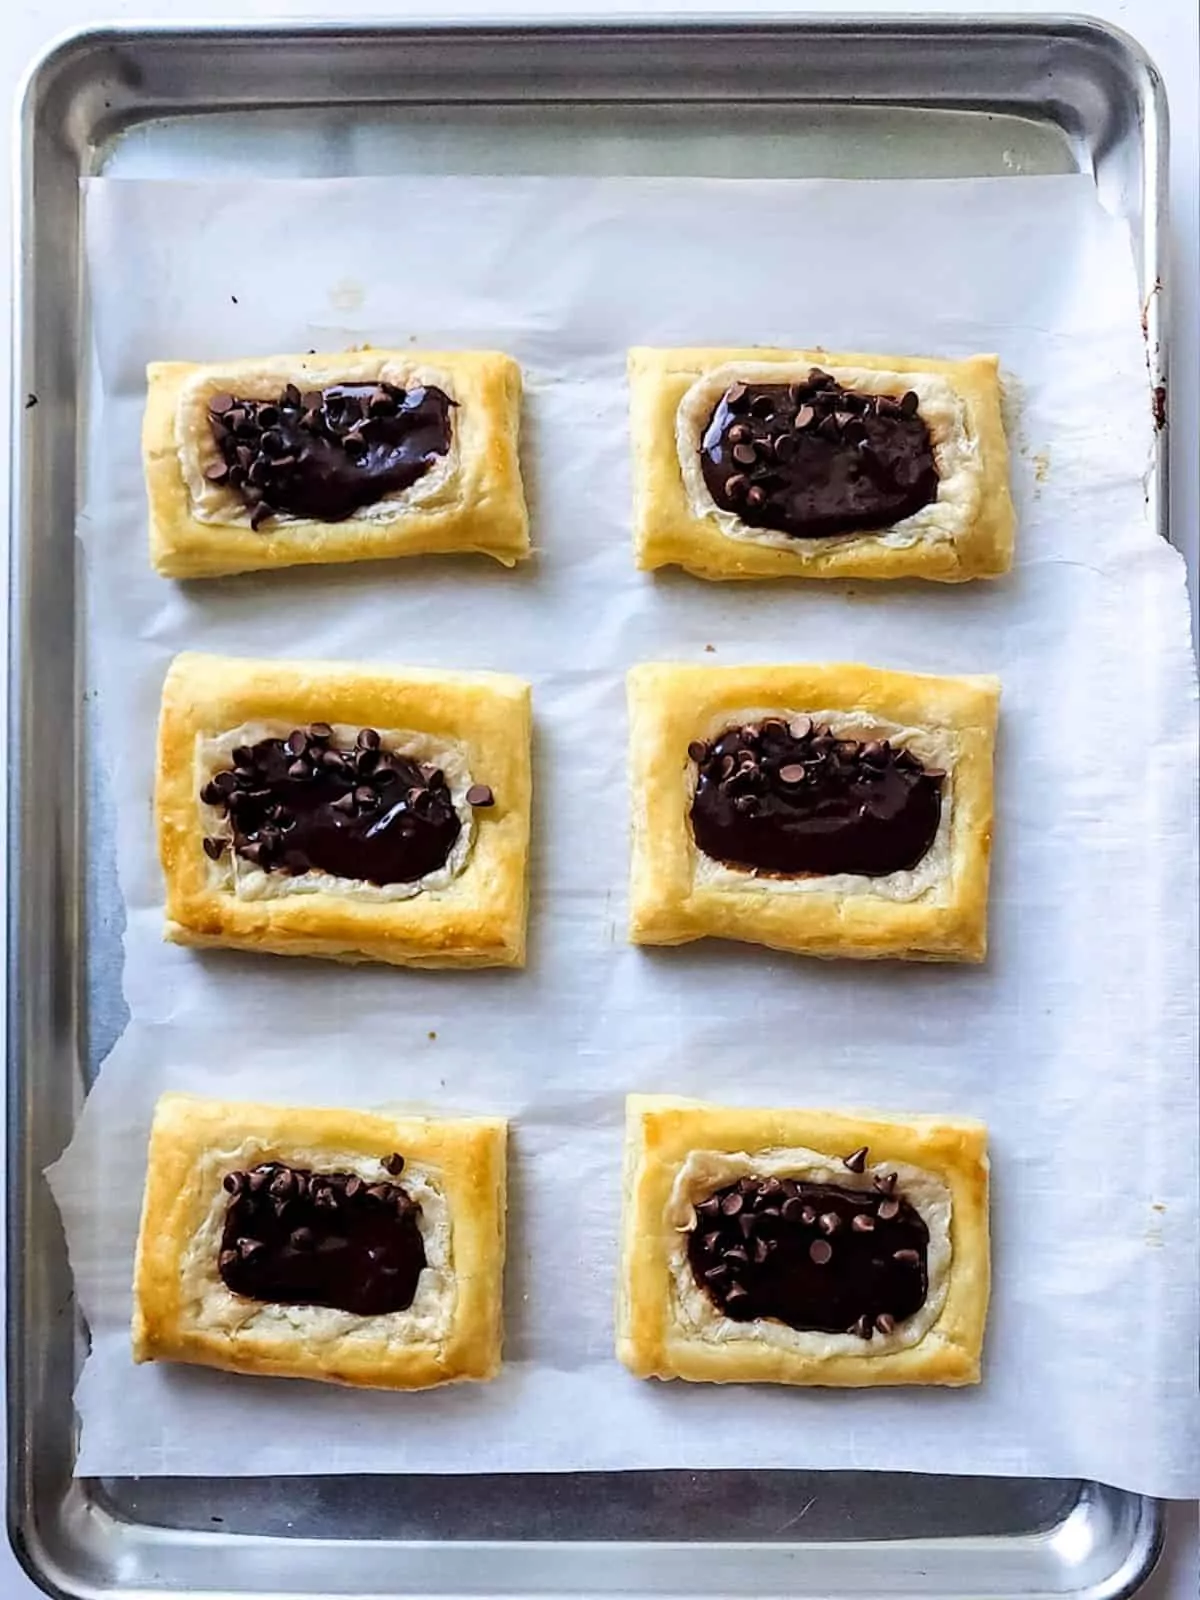 baked chocolate cream cheese puff pastry on tray.